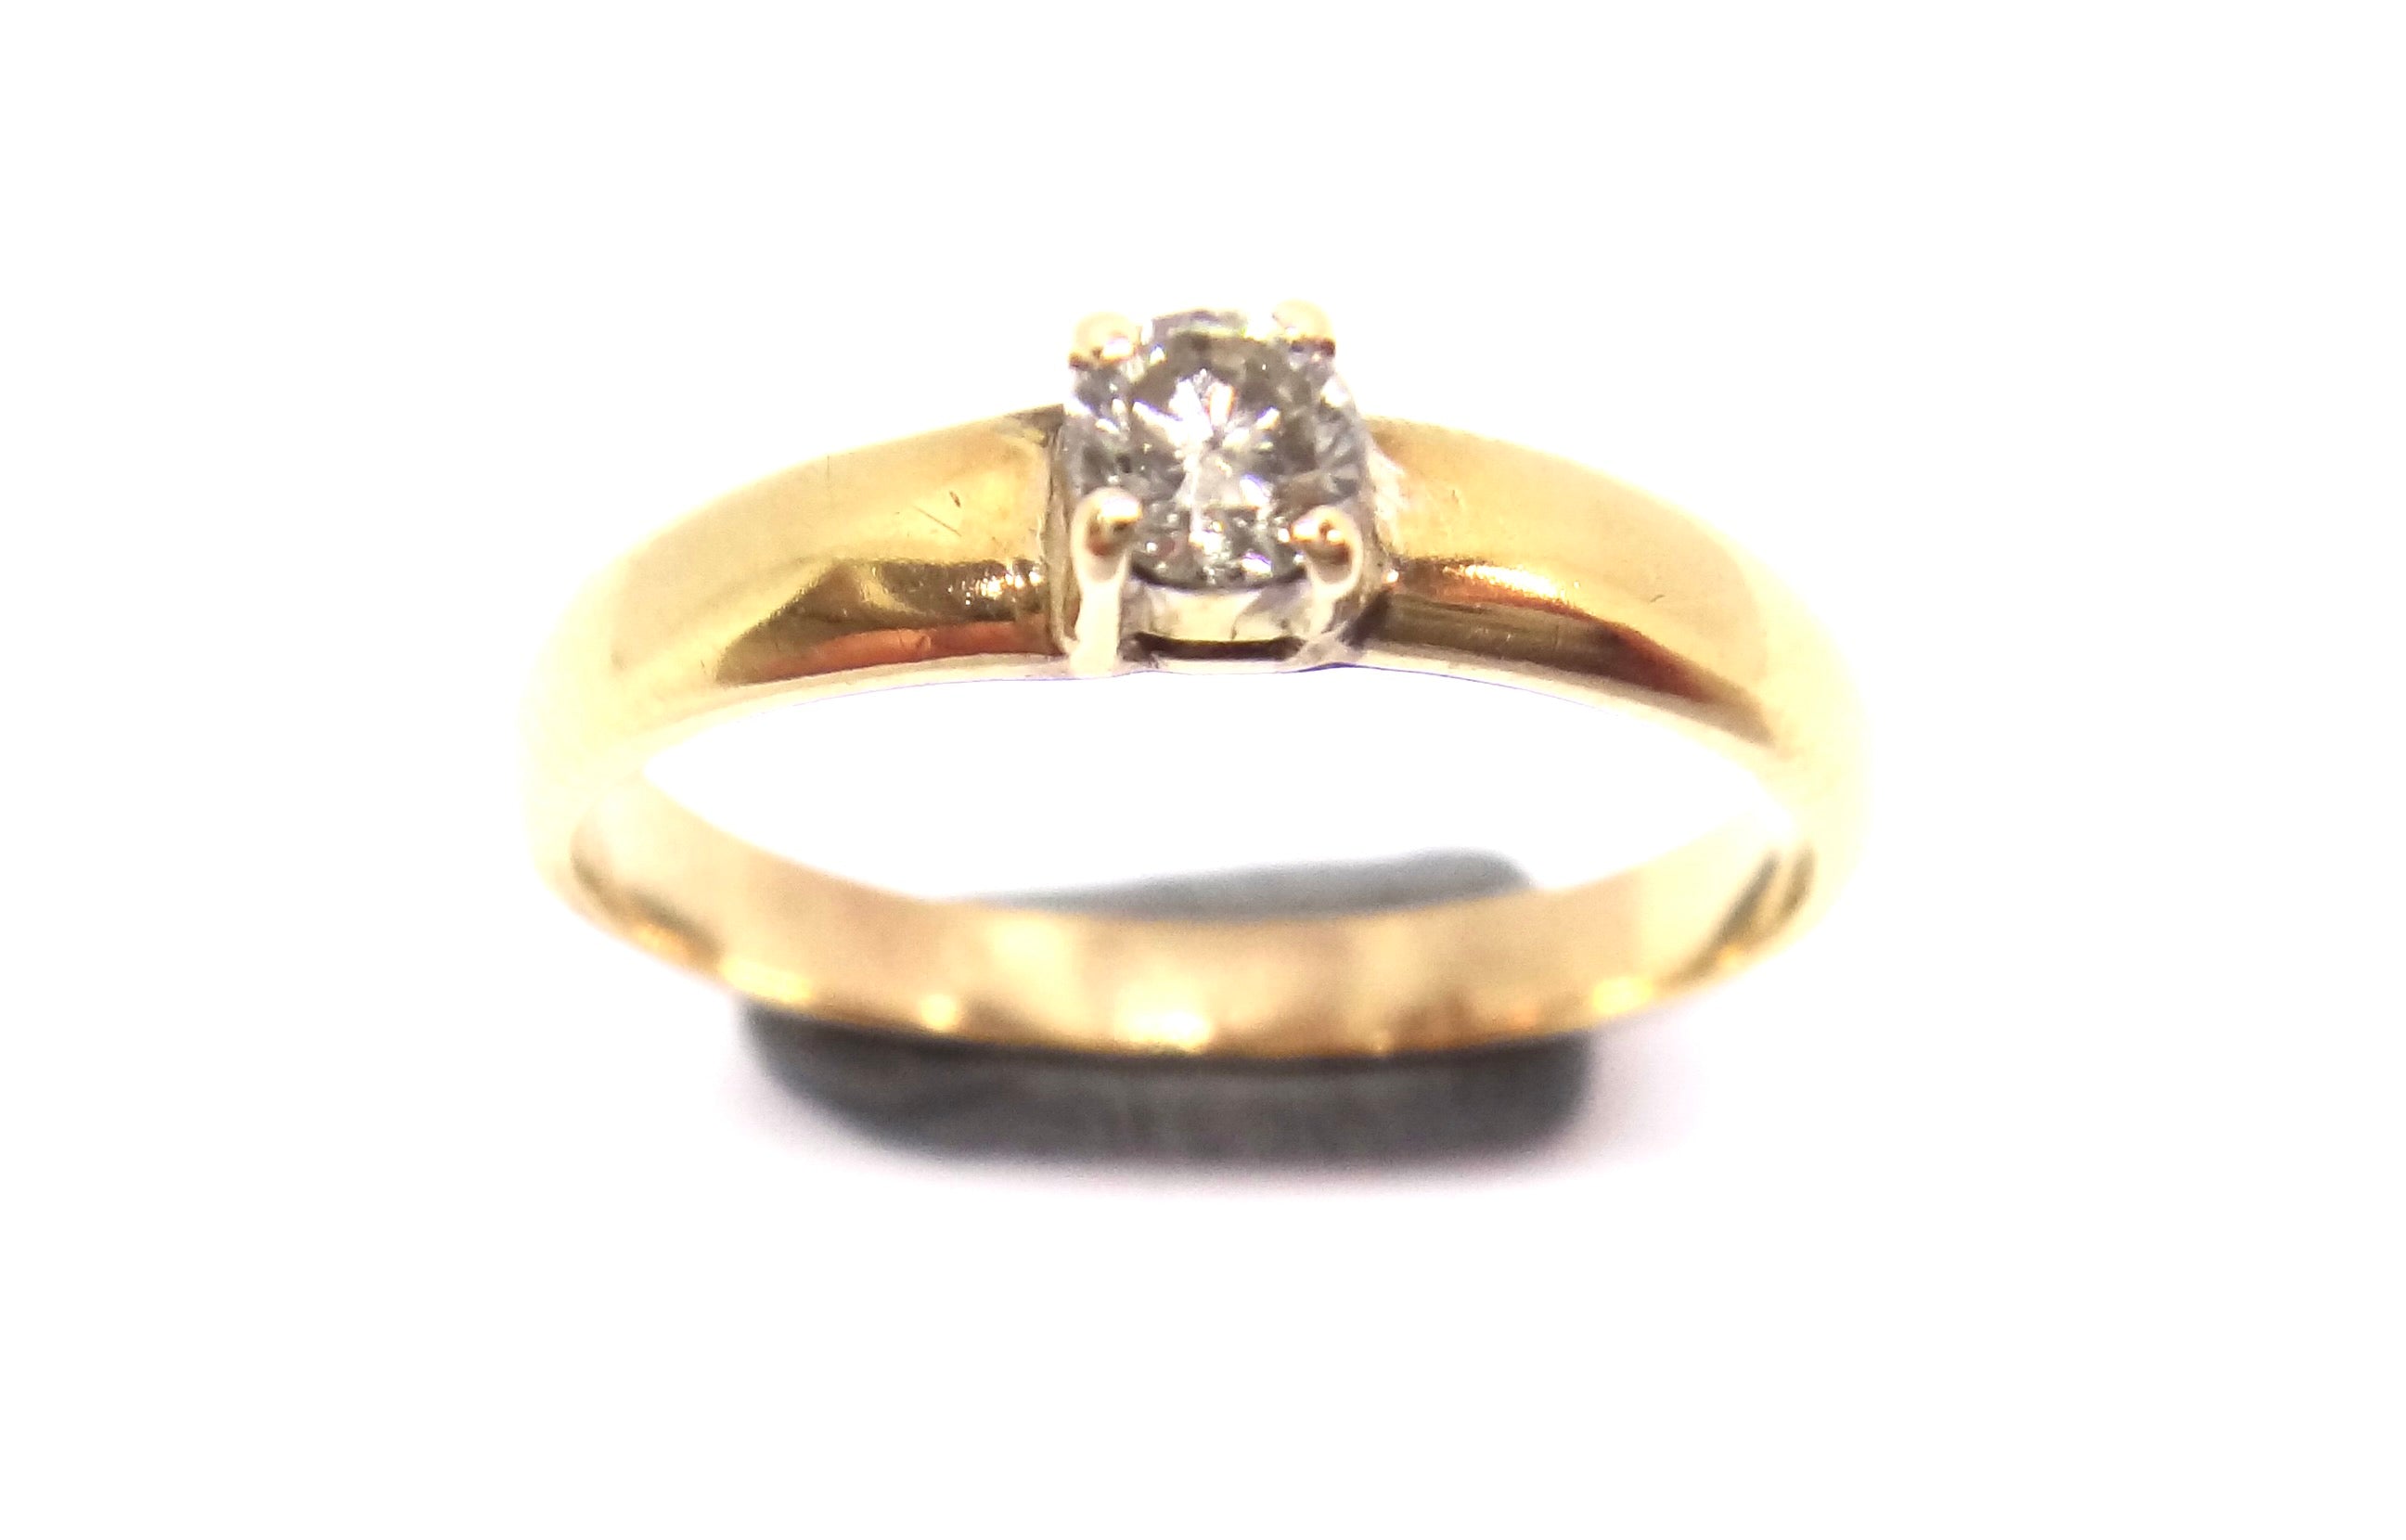 14CT Yellow GOLD & Diamond Solitaire Ring